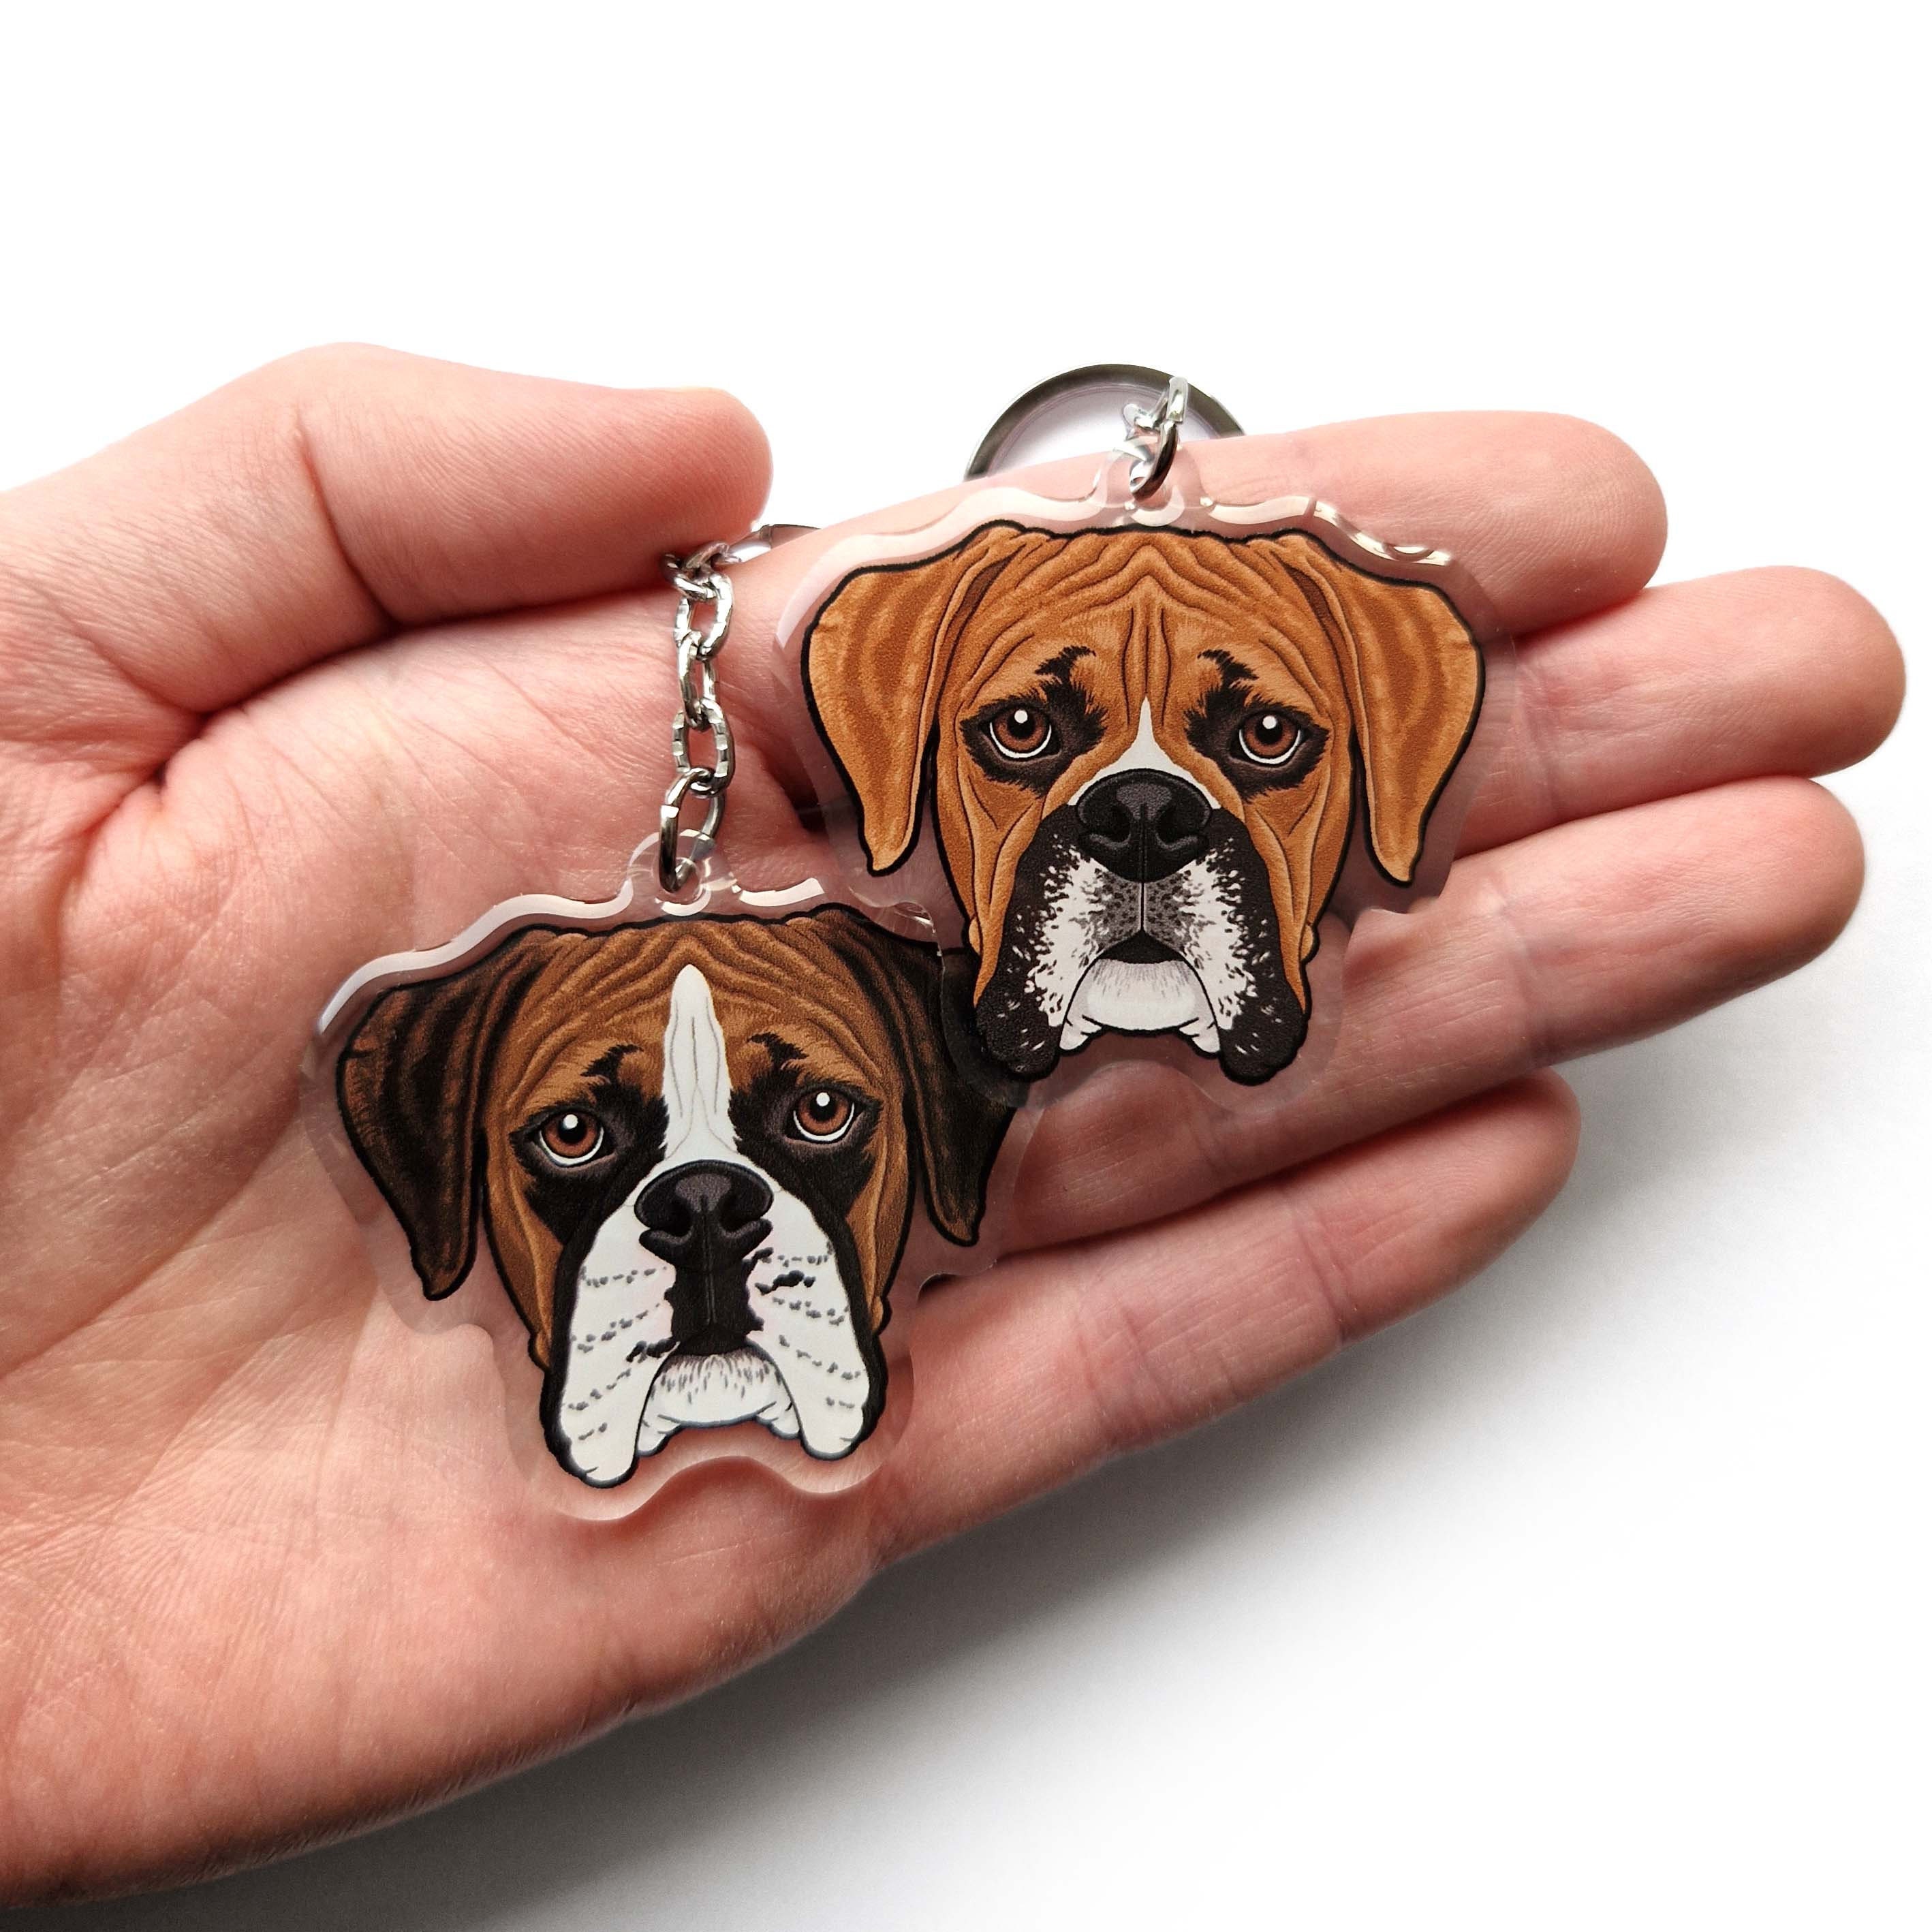 12 Pcs Cute Puppy Dog Keychains Dog Party Favors Acrylic Key Ring  Decoration for Pet Dog Party Gifts…See more 12 Pcs Cute Puppy Dog Keychains  Dog